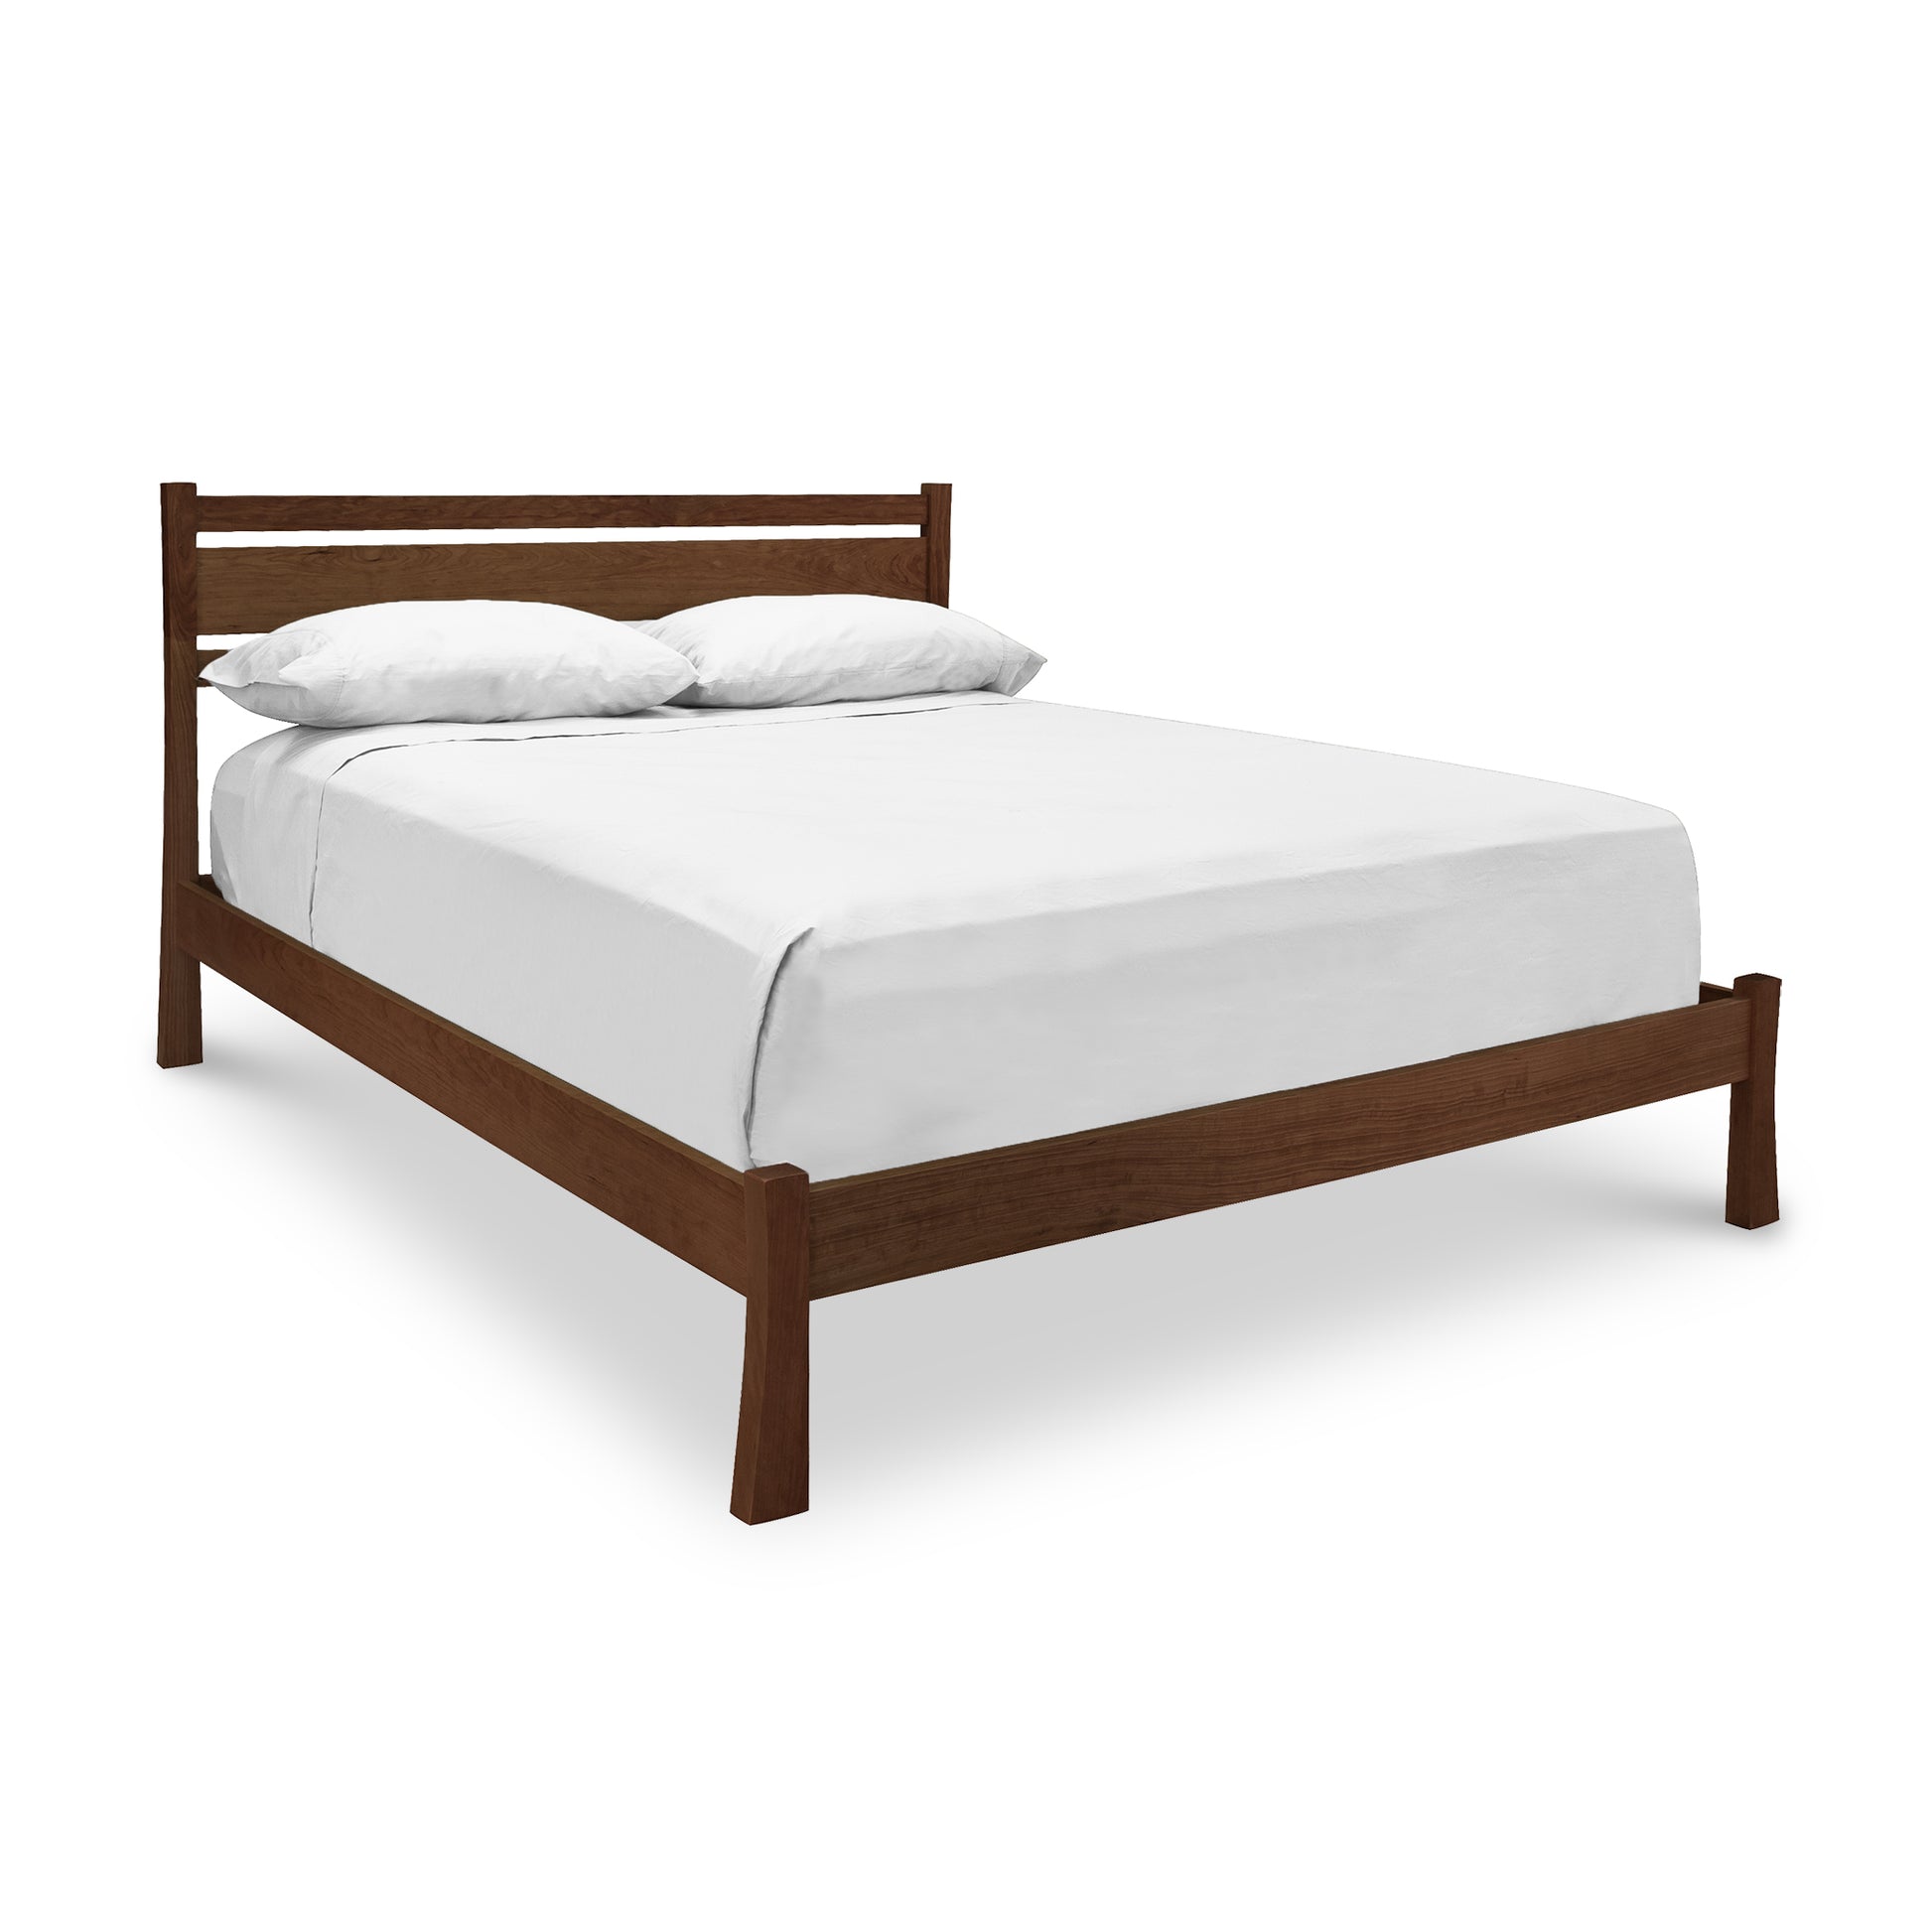 A Vermont Furniture Designs Horizon Platform Bed with a wooden frame and white sheets.